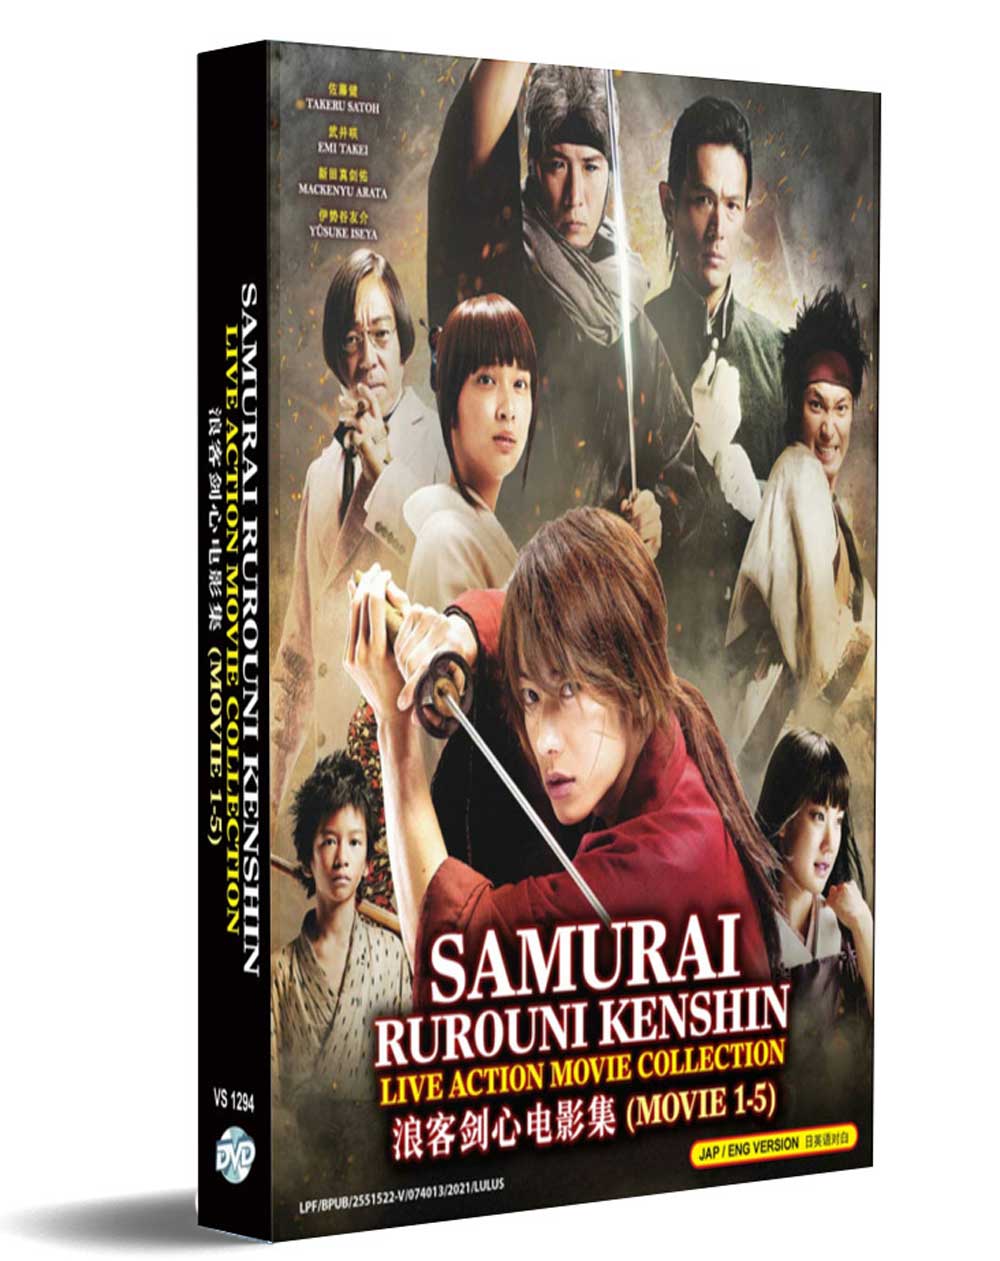 Rurouni Kenshin Live Action Movie Collection (DVD) (2012-2021) Anime